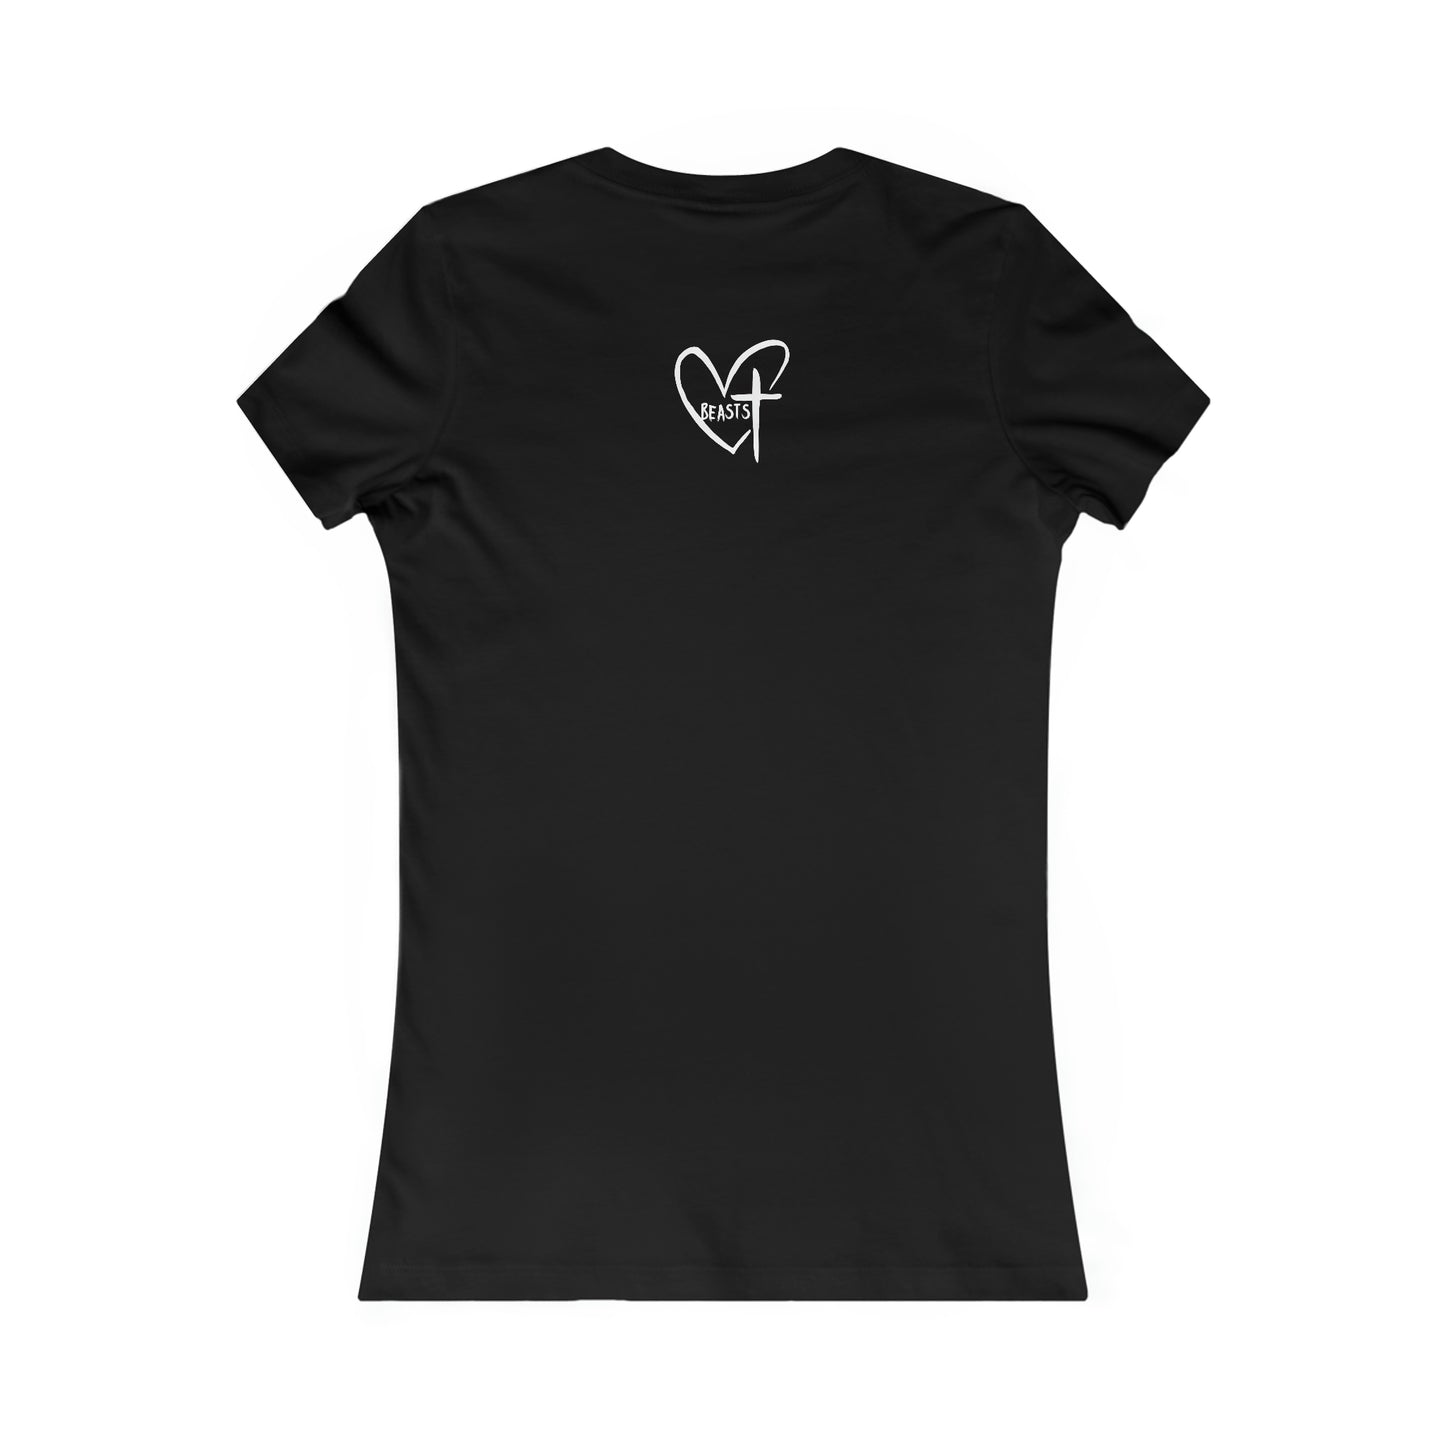 One Nation Women's Tee